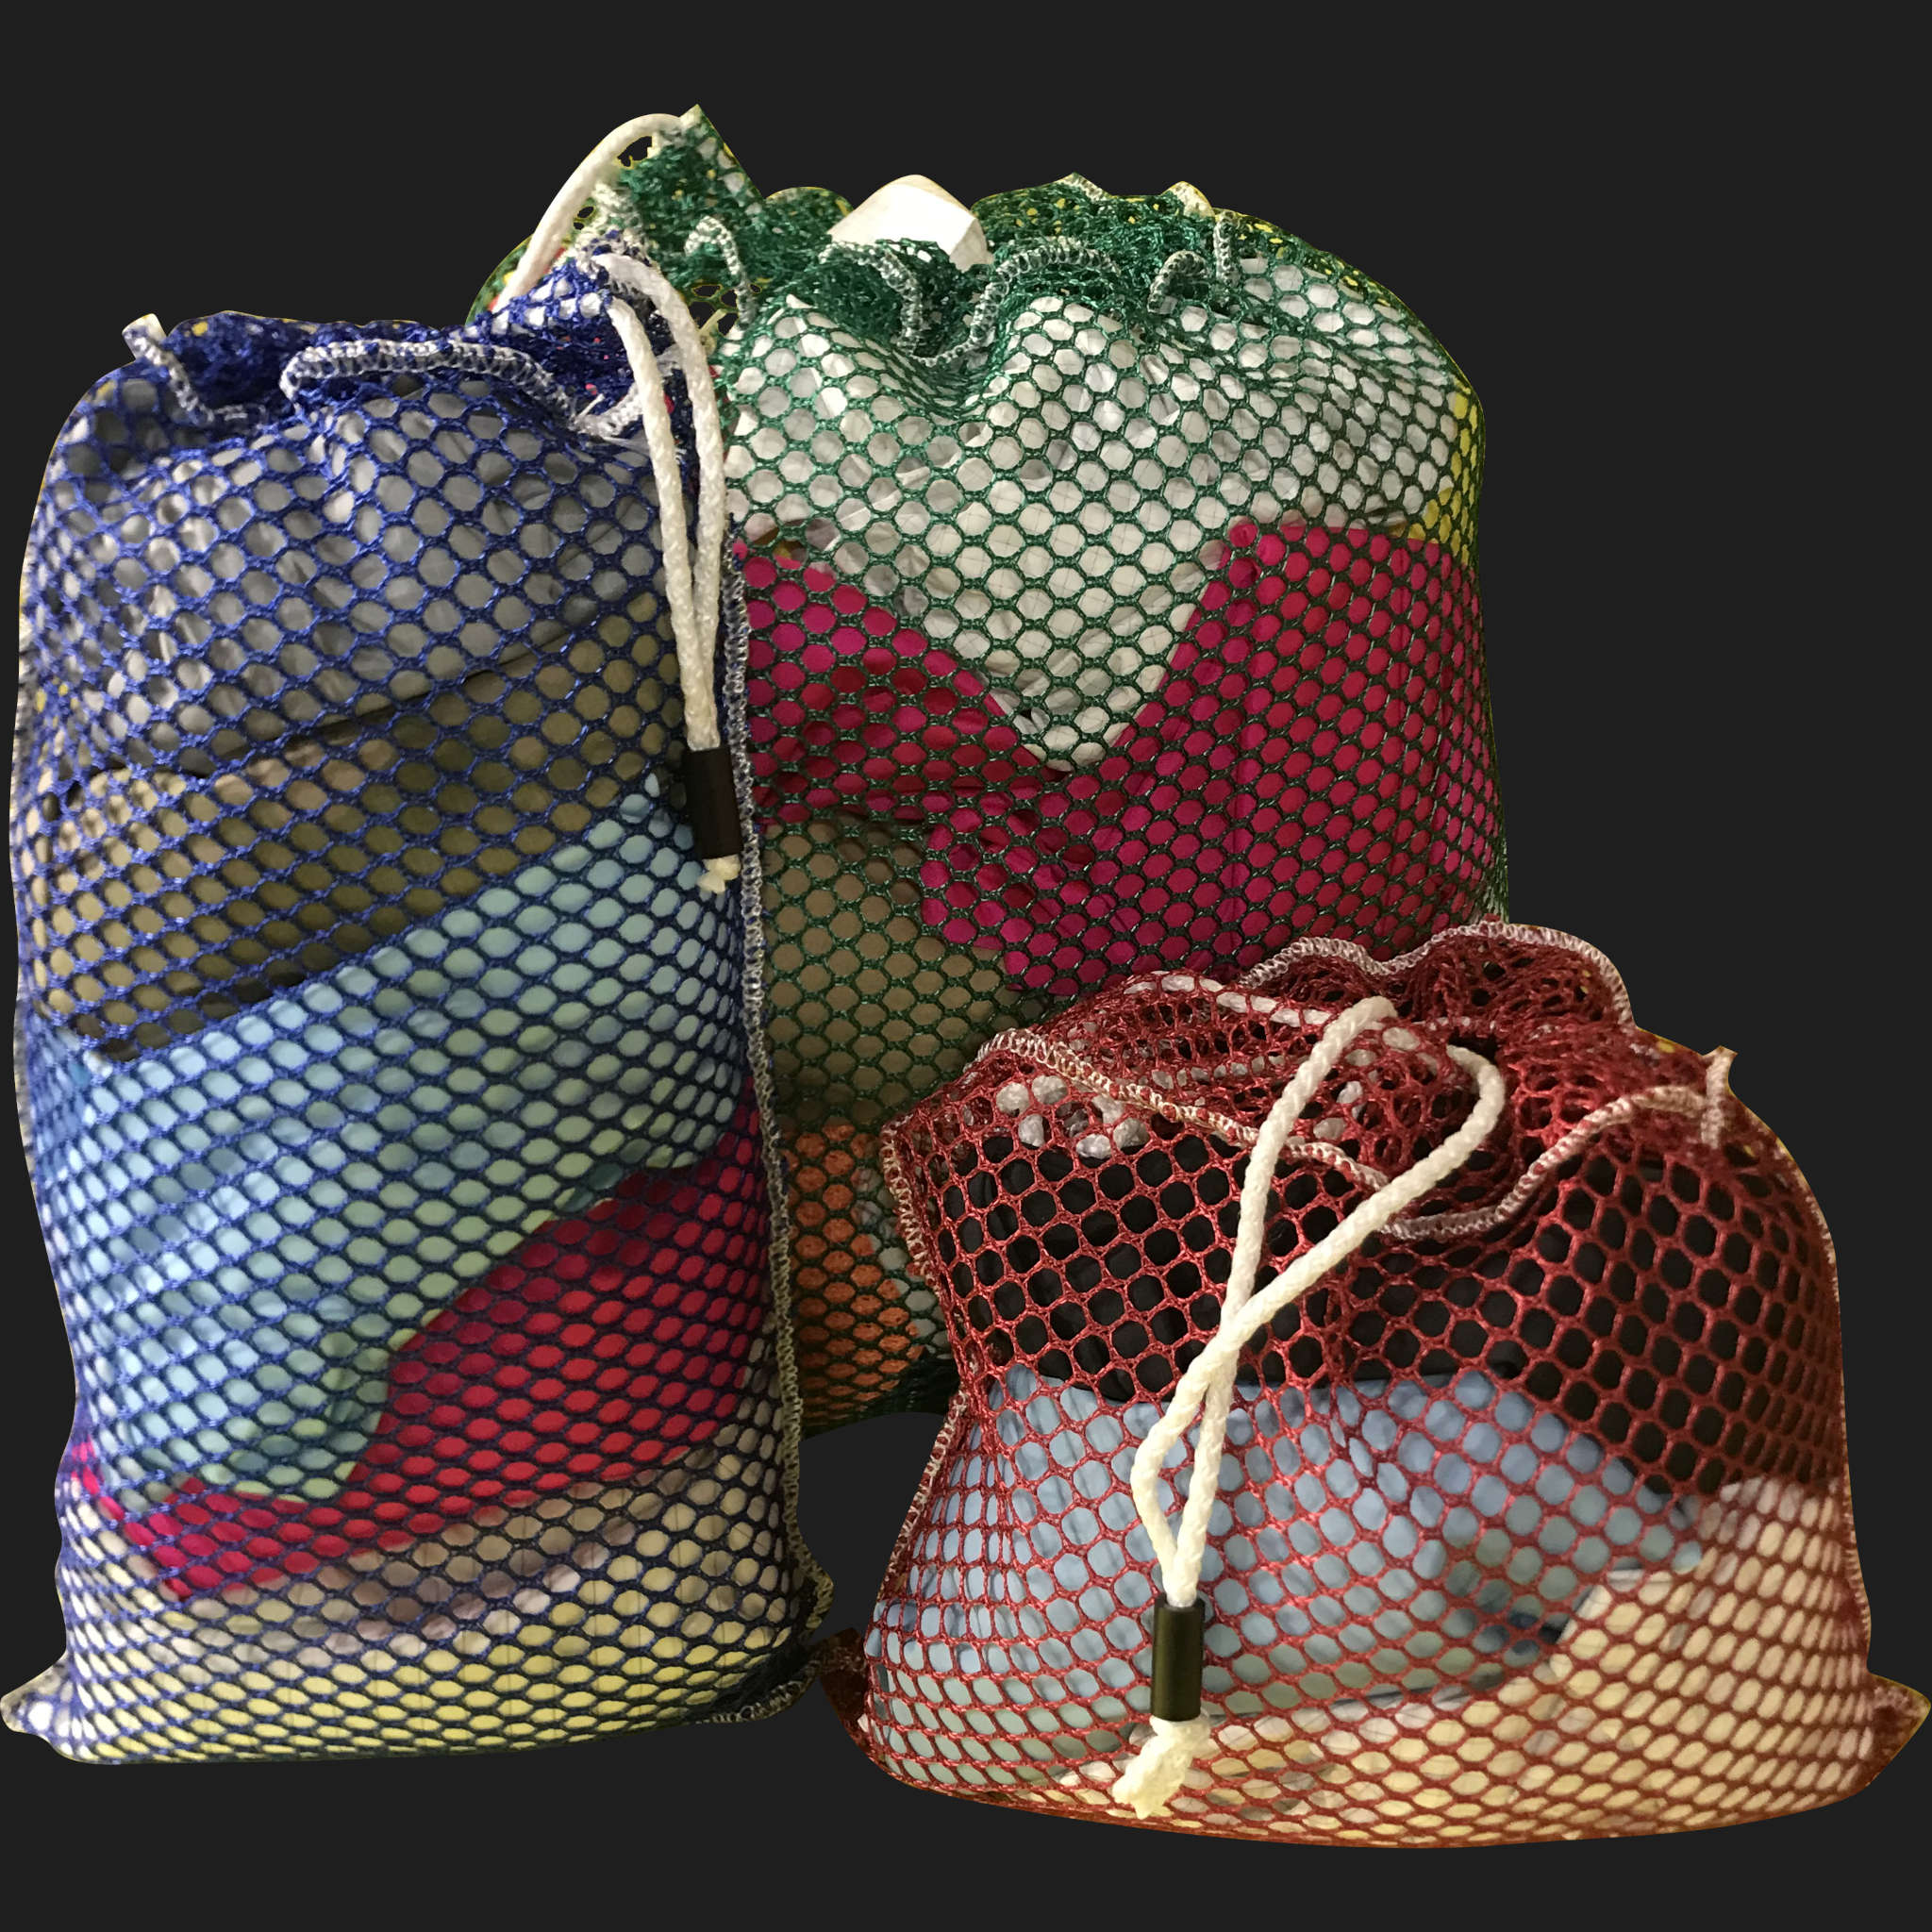 40" x 56" Customized Mesh-Net-Laundry Bags Heavy Duty with Cord and barrellock closure